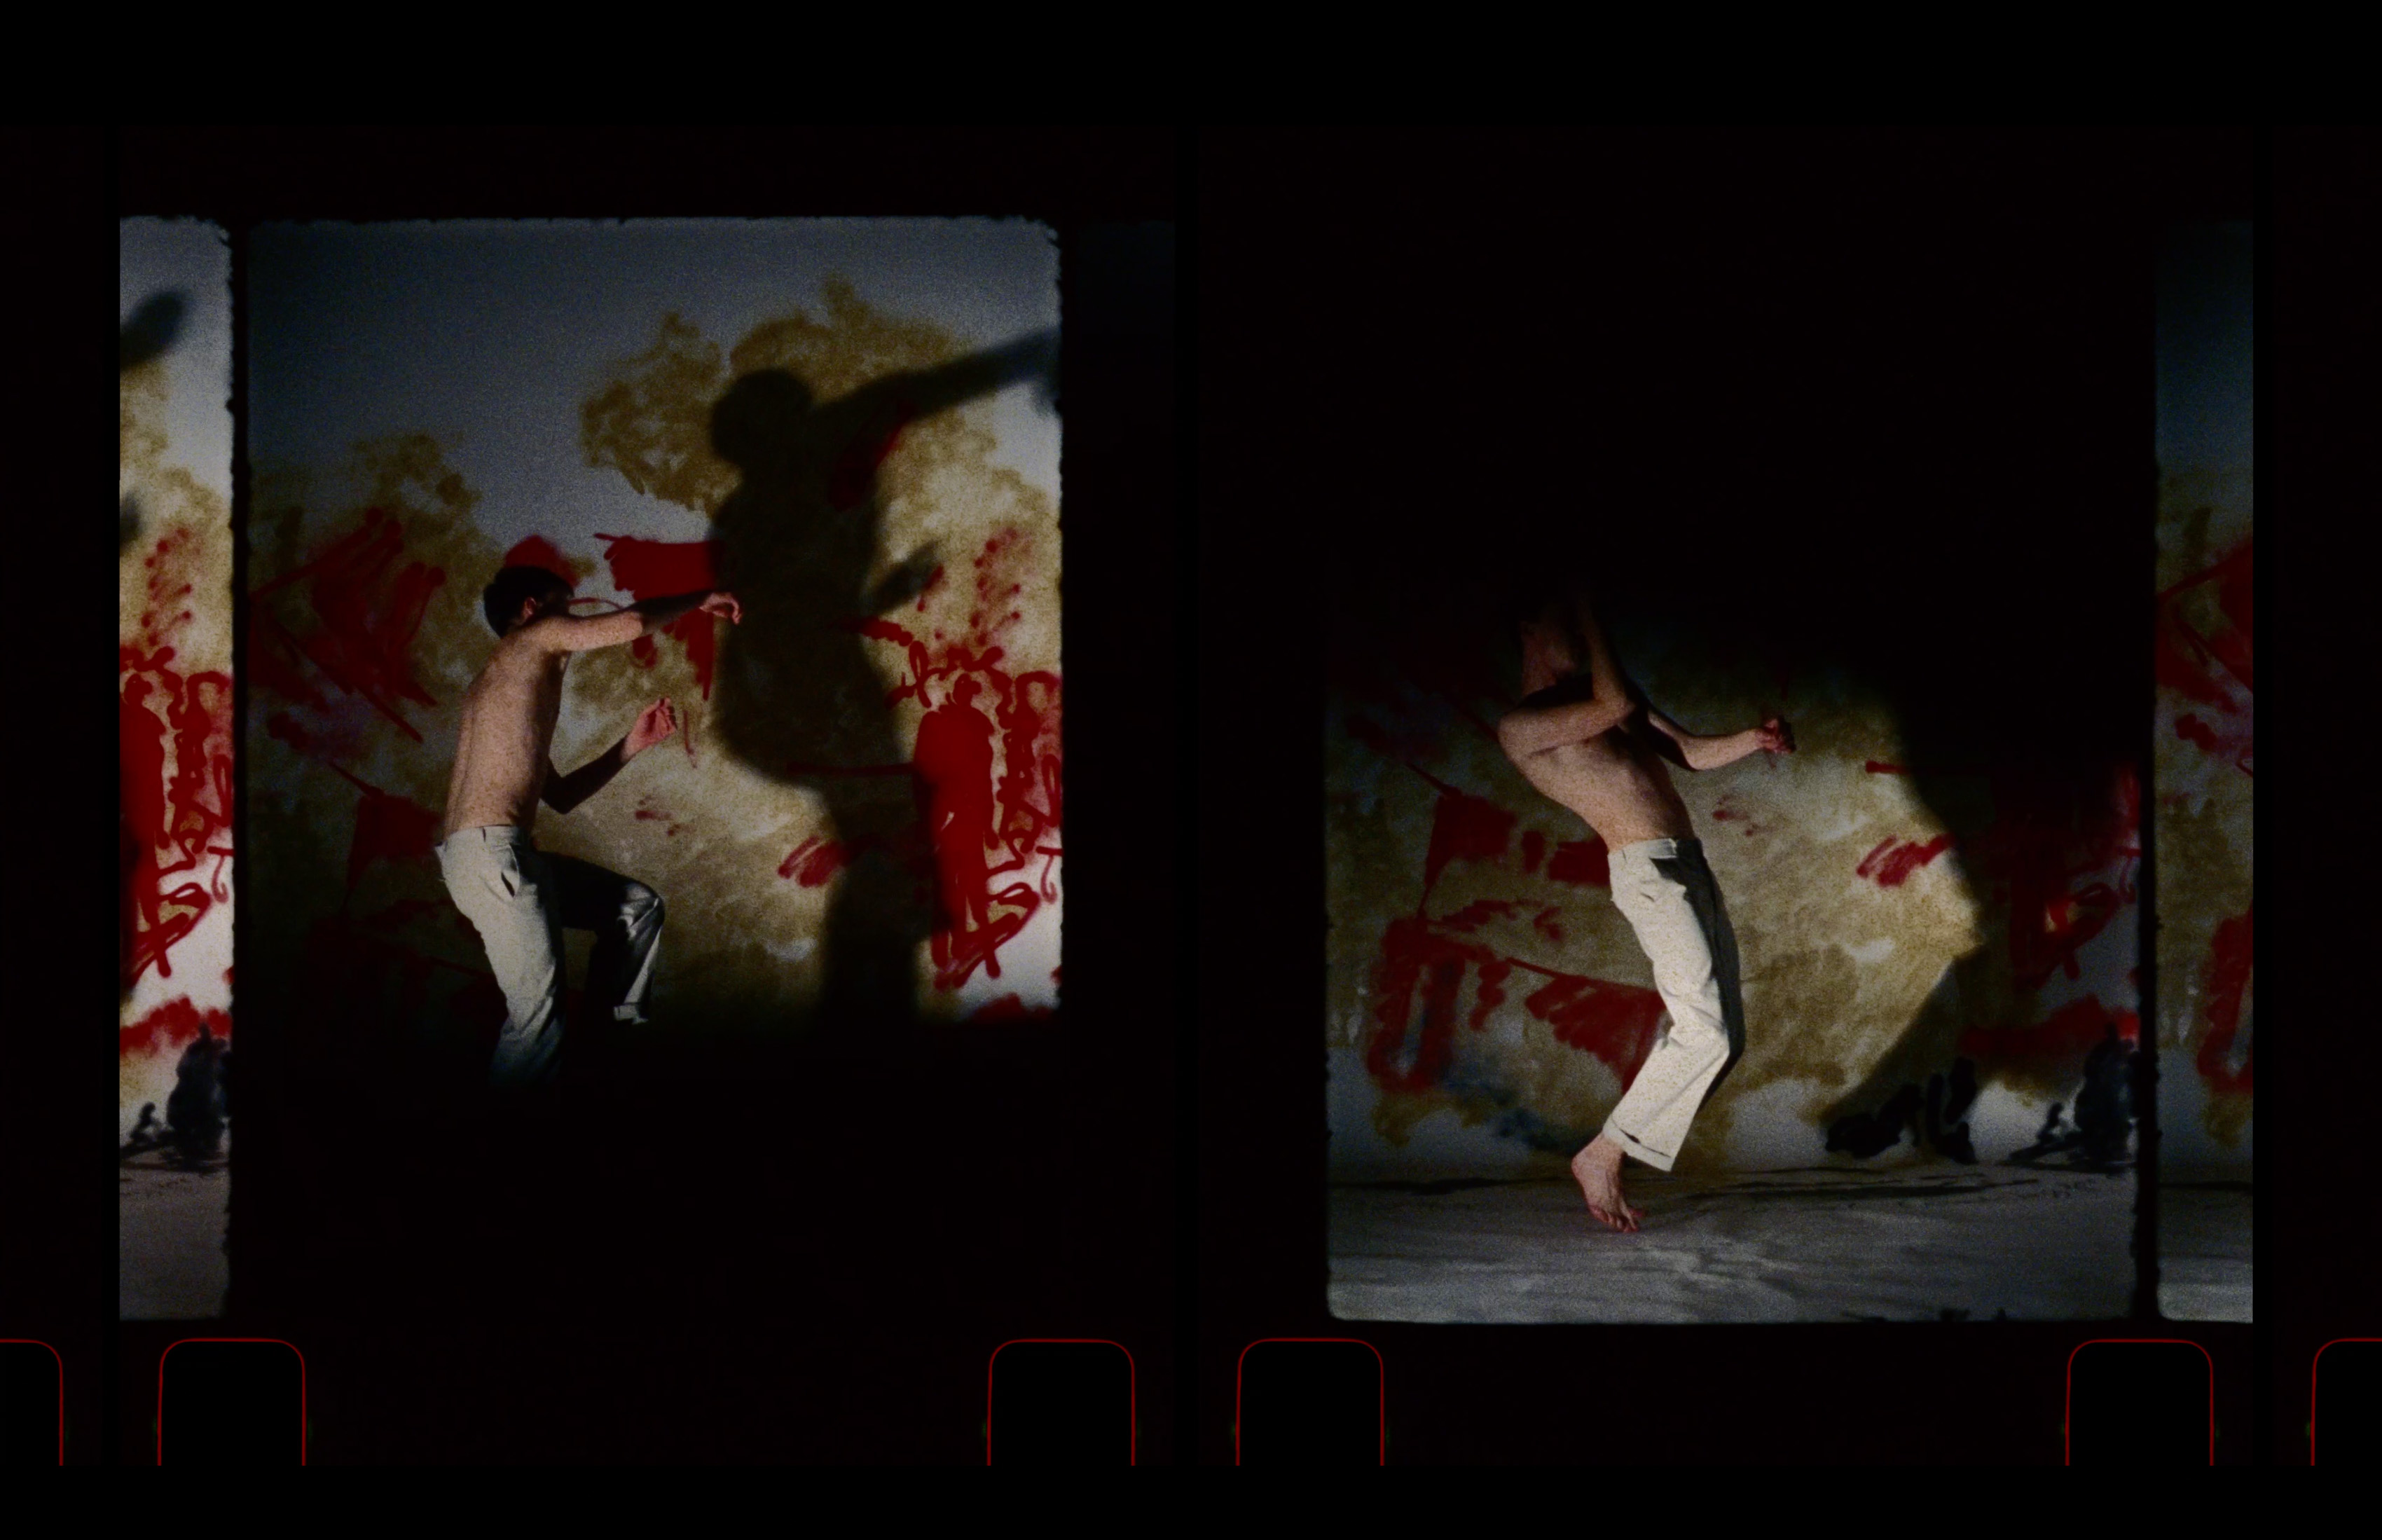 A still from 16mm film showing a male figure moving in front of a spray painted red backdrop